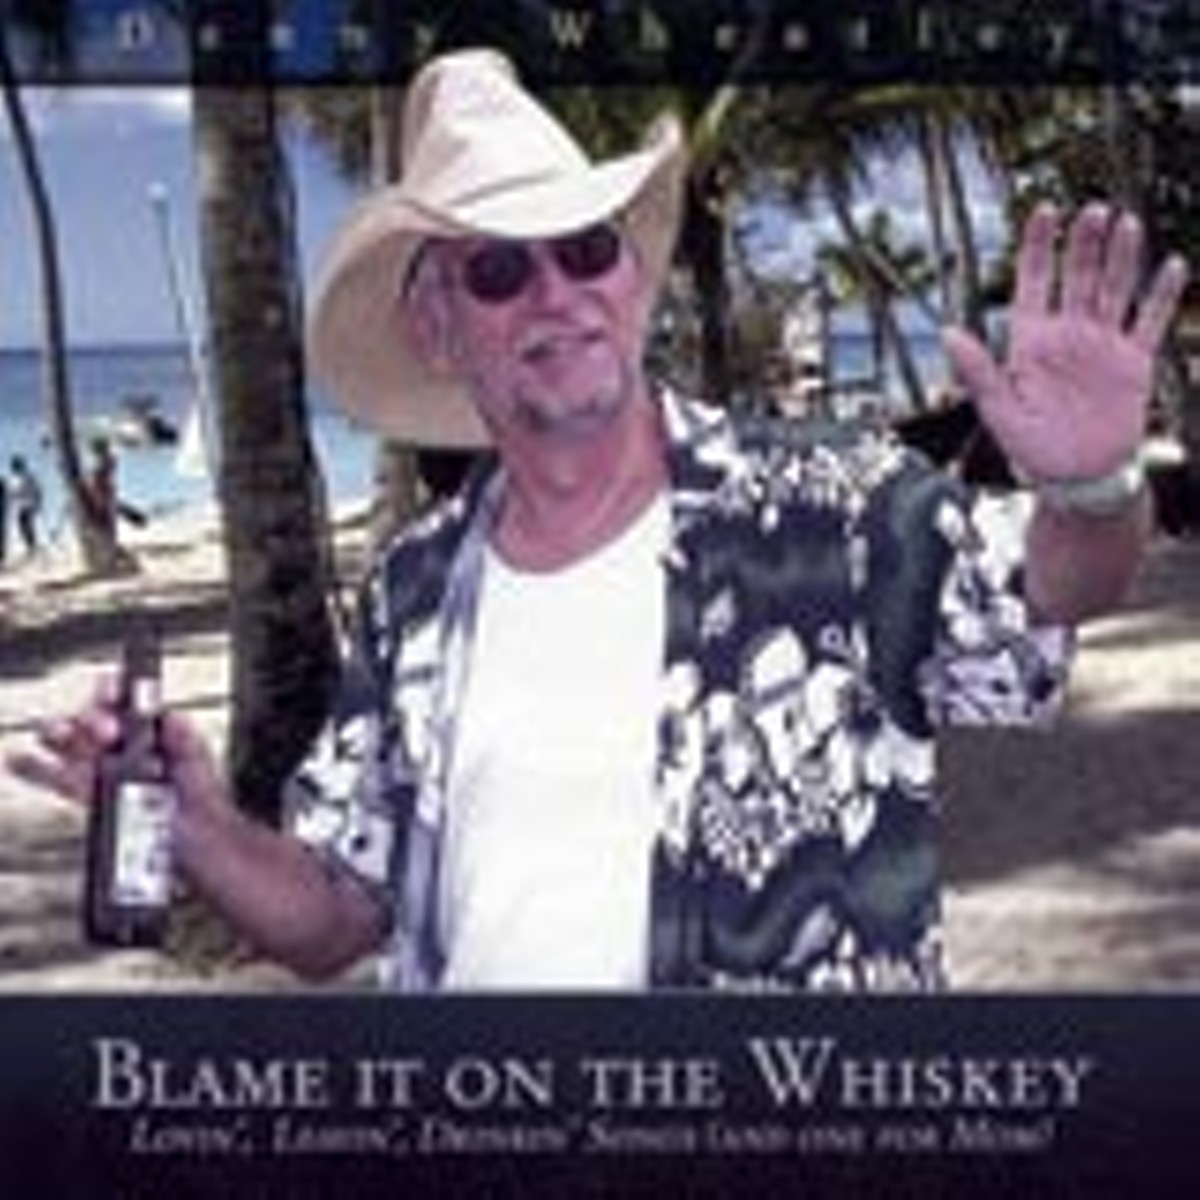 Blame it on the Whiskey